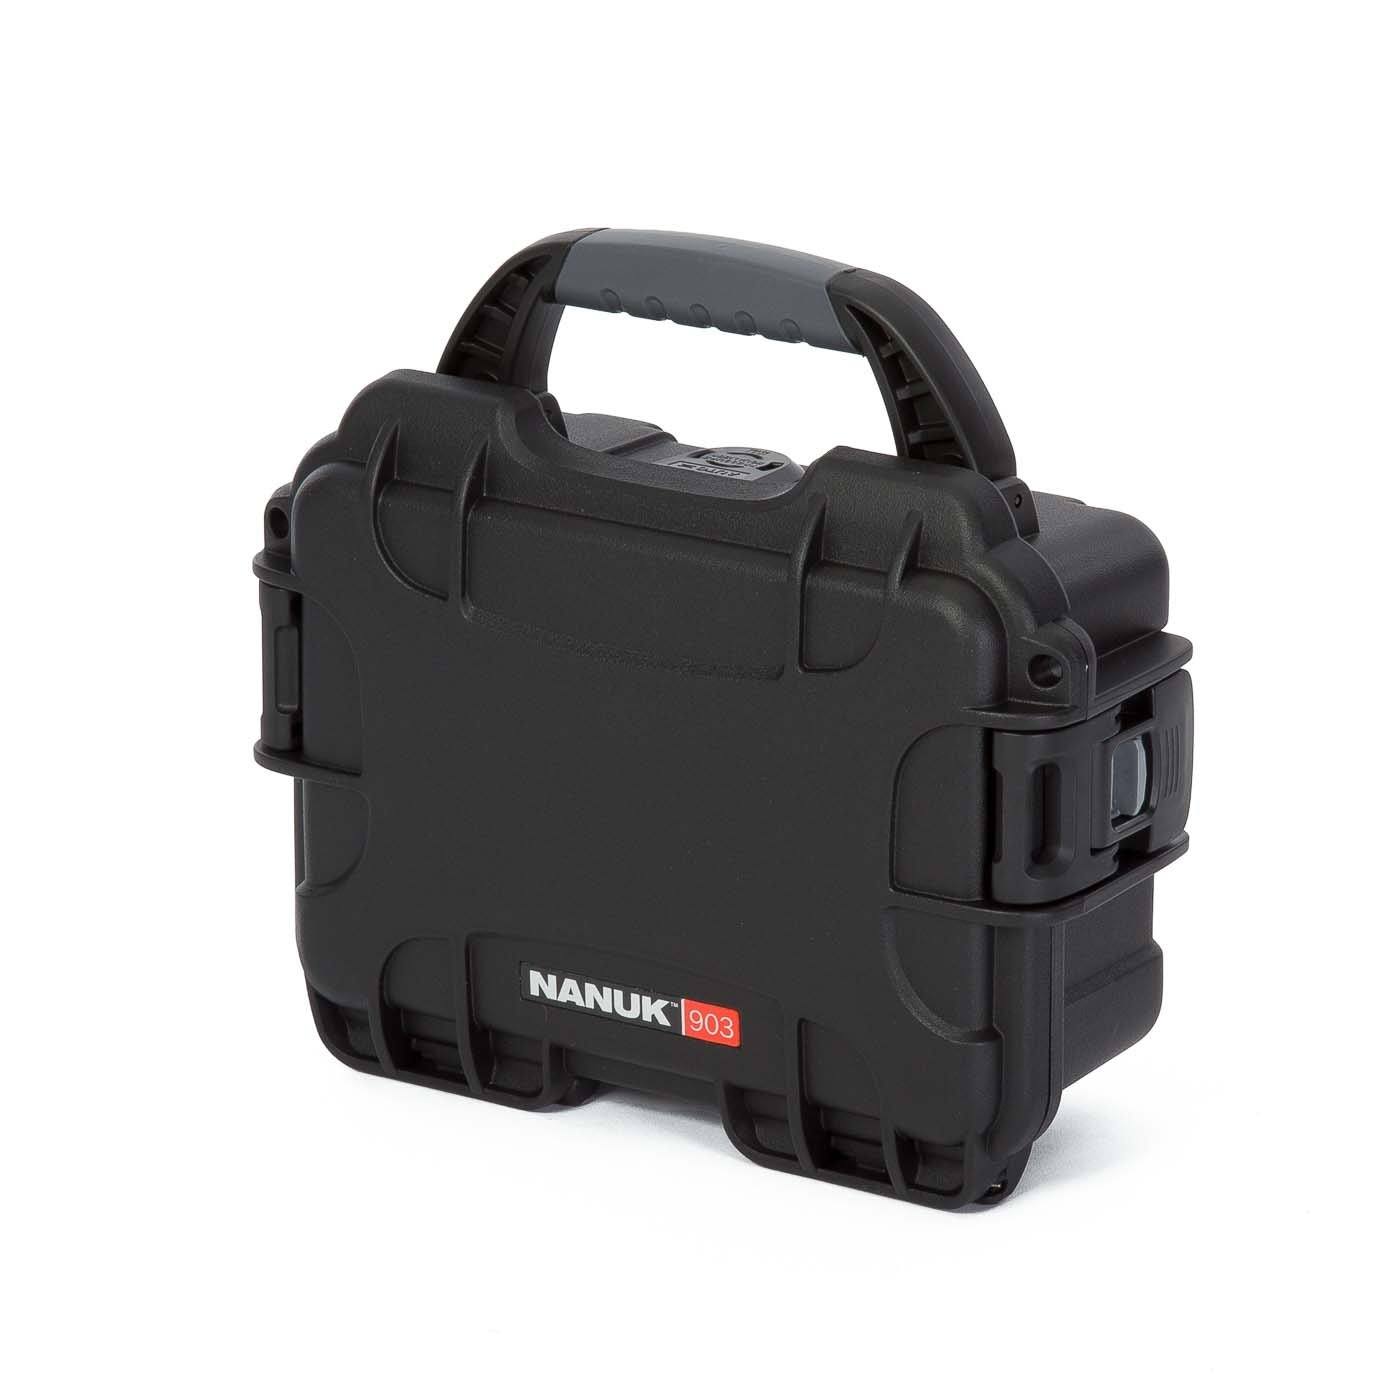 Looking for a Small Hard Cases for your Gear? –